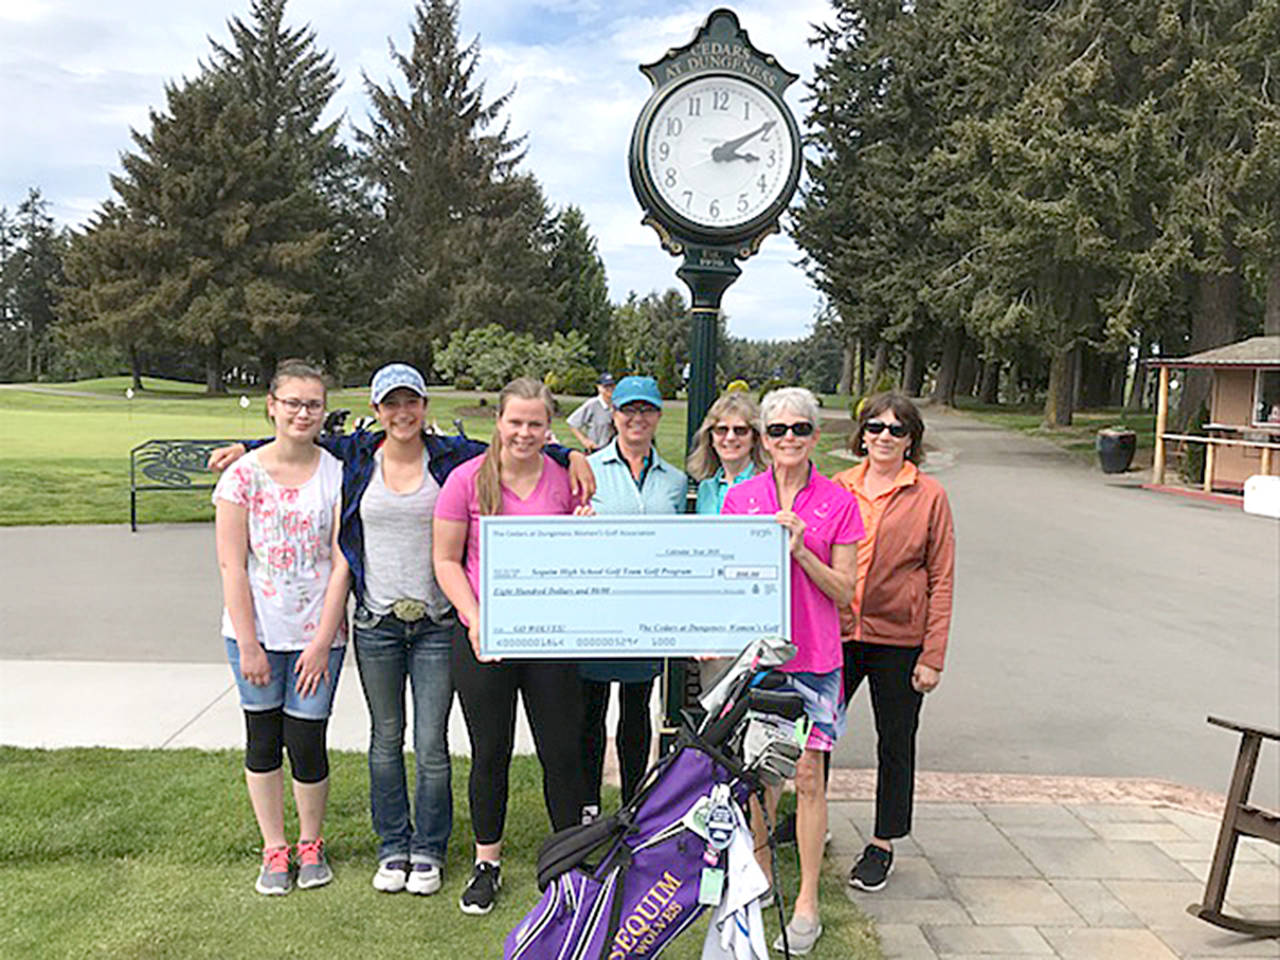 The Cedars at Dungeness Women’s Golf Club donated proceeds from its annual Whine & Roses Invitational Golf Tournament to the Sequim High School Golf program. Cathy Grant, Whine & Roses co-chair is joined by Judy Reno, co-captain, Lisa Ballantyne, captain, and Jan Clendening in presenting the check to Sarah Shea, captain of the girls golf team. Shea is joined by Sequim teammates Minzie Koch and Yana Hoesel.                                The Cedars at Dungeness Women’s Golf Club